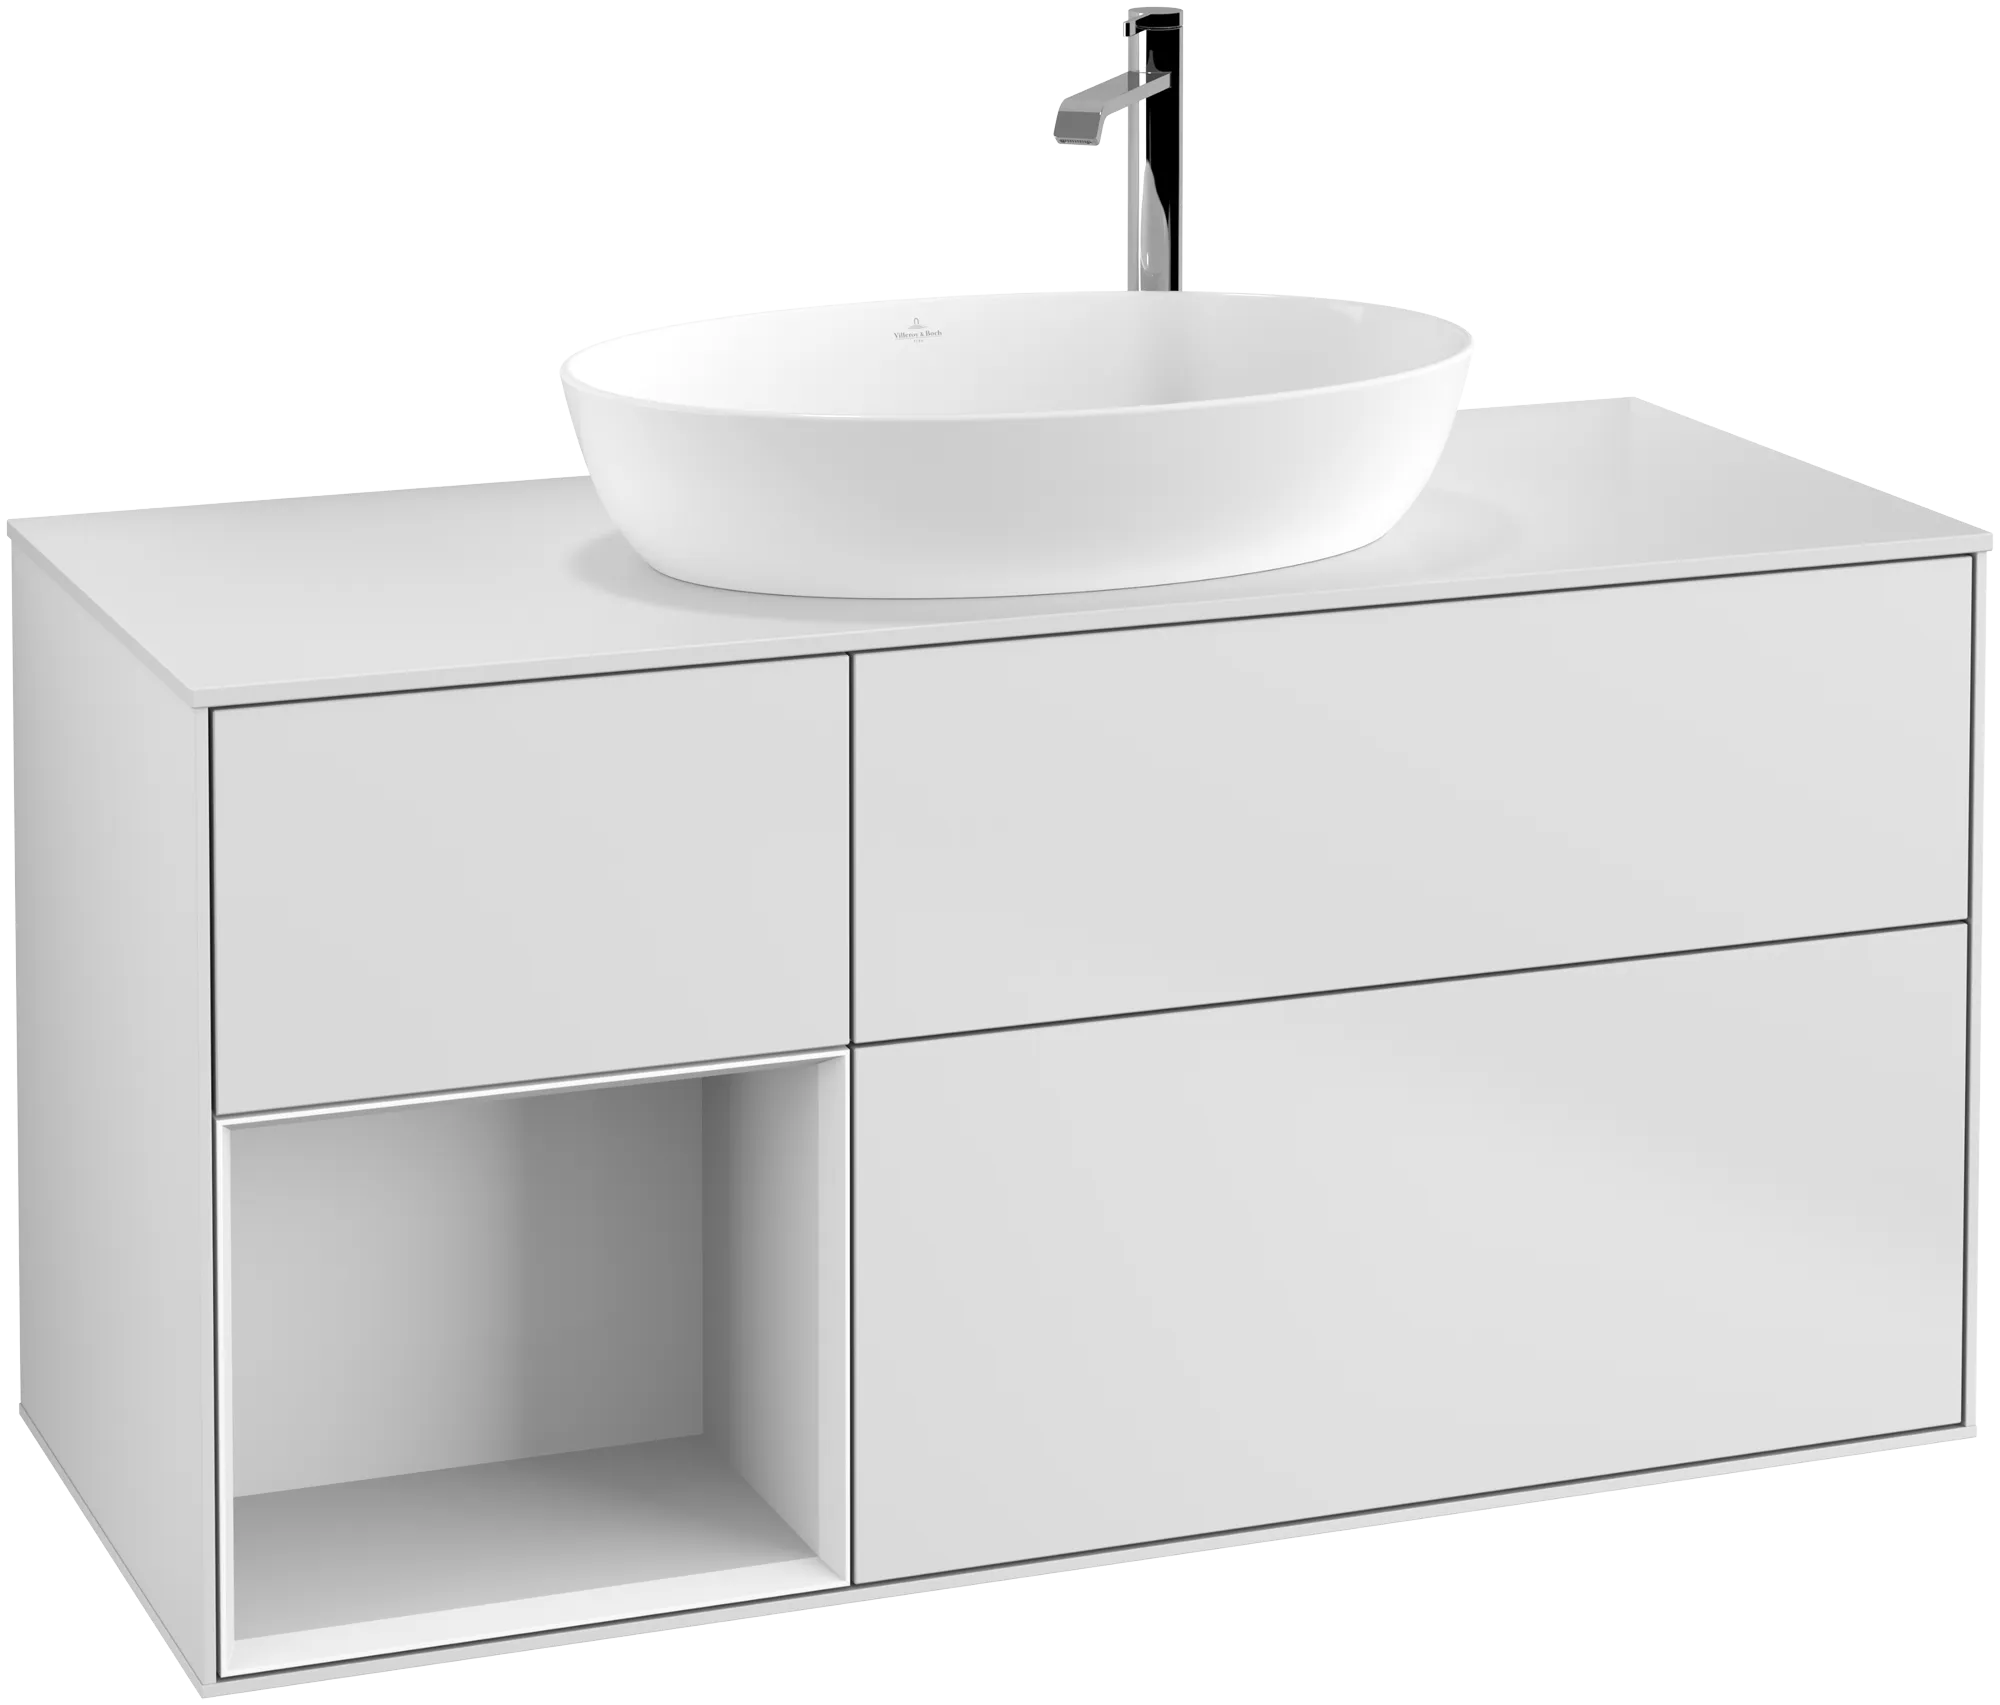 VILLEROY BOCH Finion Vanity unit, with lighting, 3 pull-out compartments, 1200 x 603 x 501 mm, White Matt Lacquer / Glossy White Lacquer / Glass White Matt #G941GFMT resmi